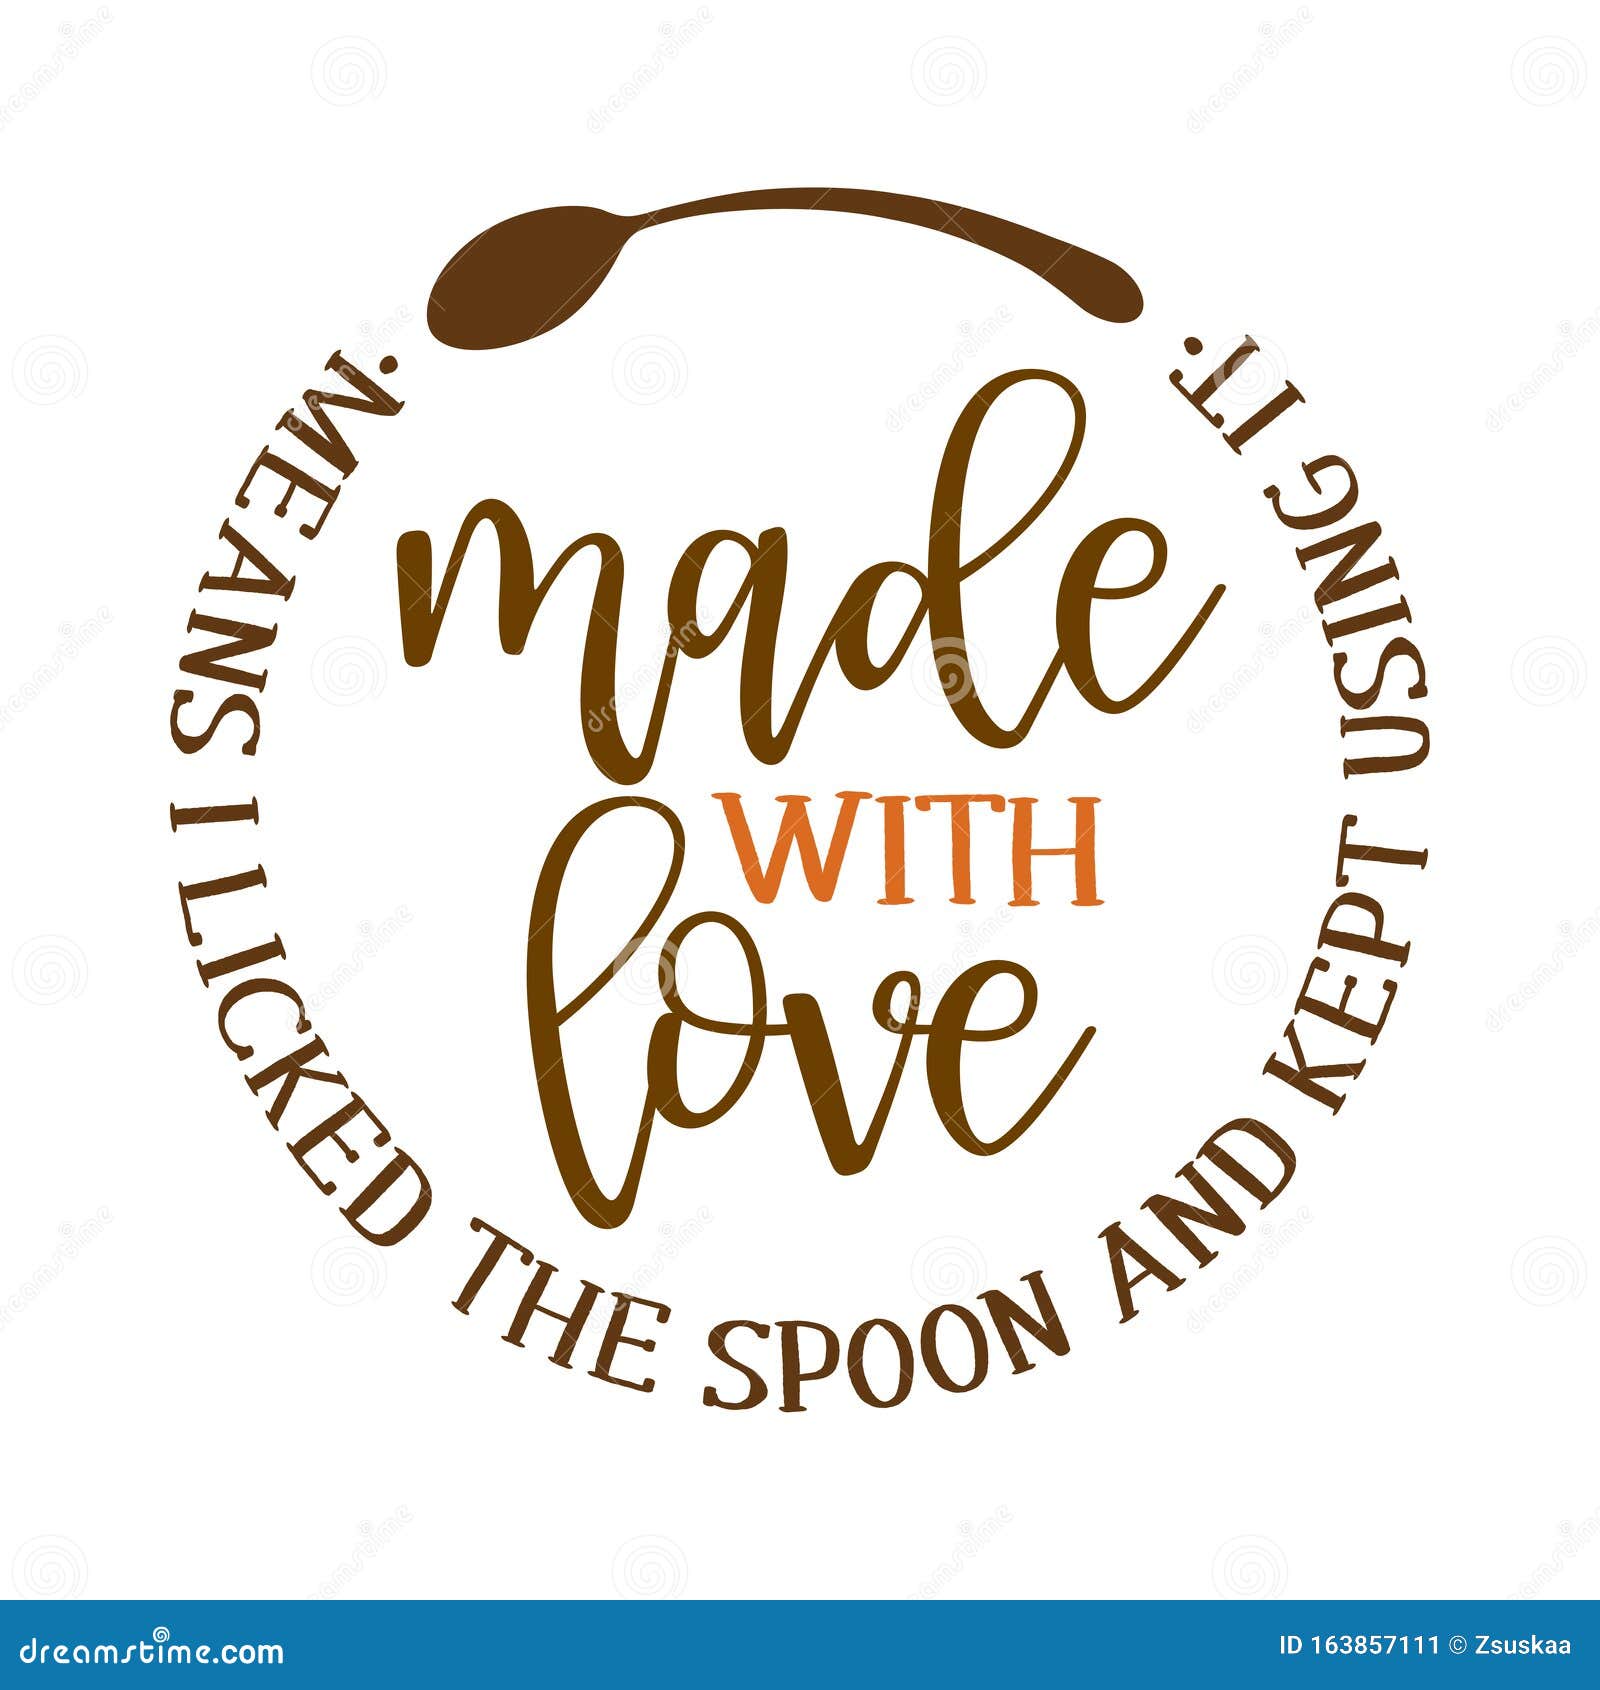 made with love means i licked the spoon and kept using it